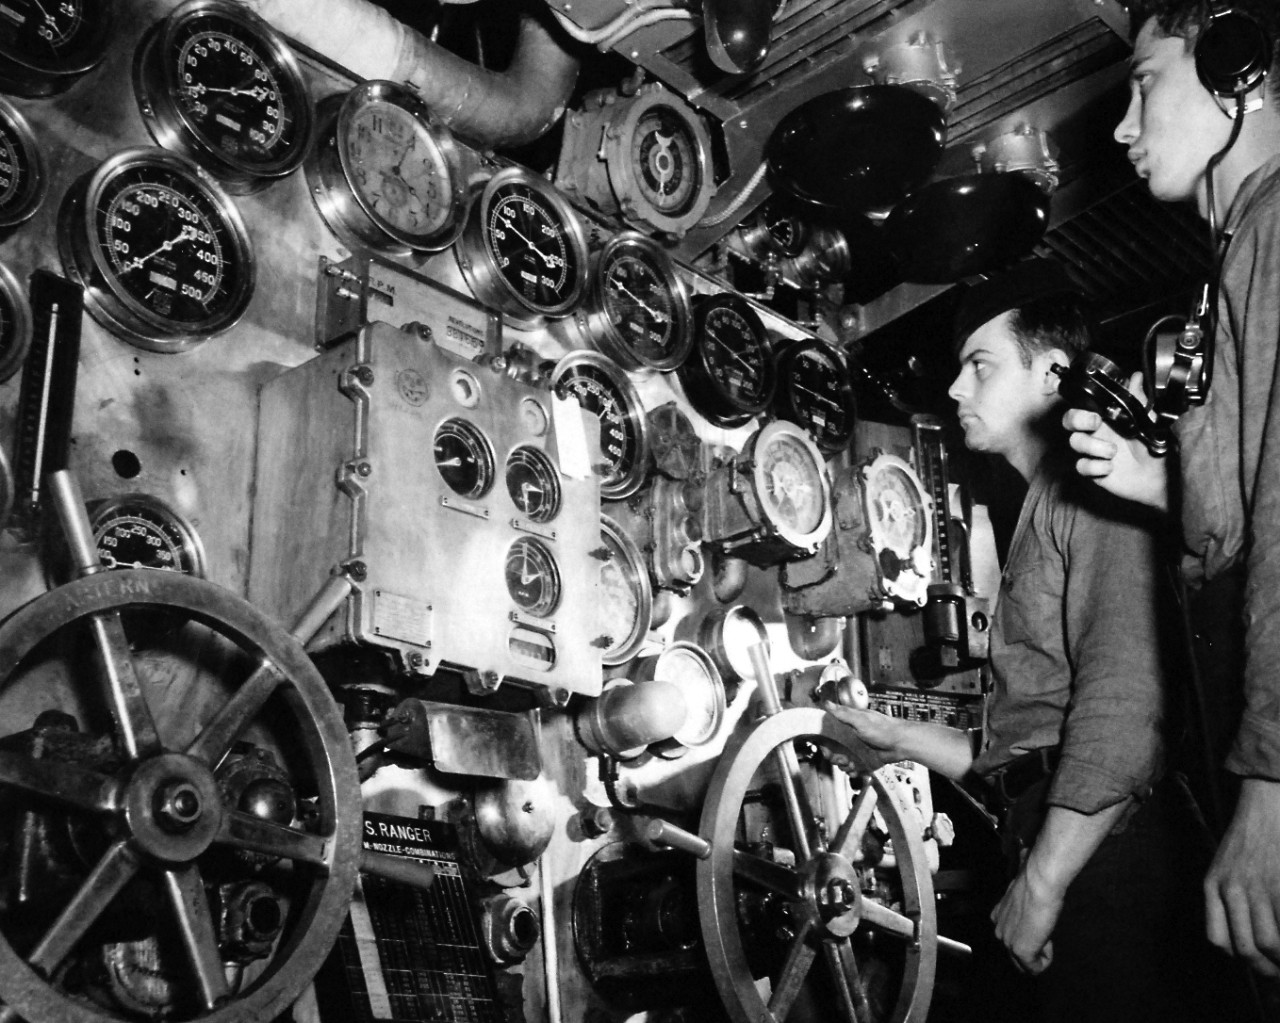 80-G-36675:   USS Ranger (CV 4), 1943.    Engine Room.   Main Throttle Board in forward engine room.  Machinist’s Mate standing the throttleman watch must keep engines at proper speeds.  The phone talker is in constant communication with the bridge and main control.   Photographed January 1943.   Official  U.S. Navy Photograph, now in the collections of the National Archives.  (2016/11/25).  